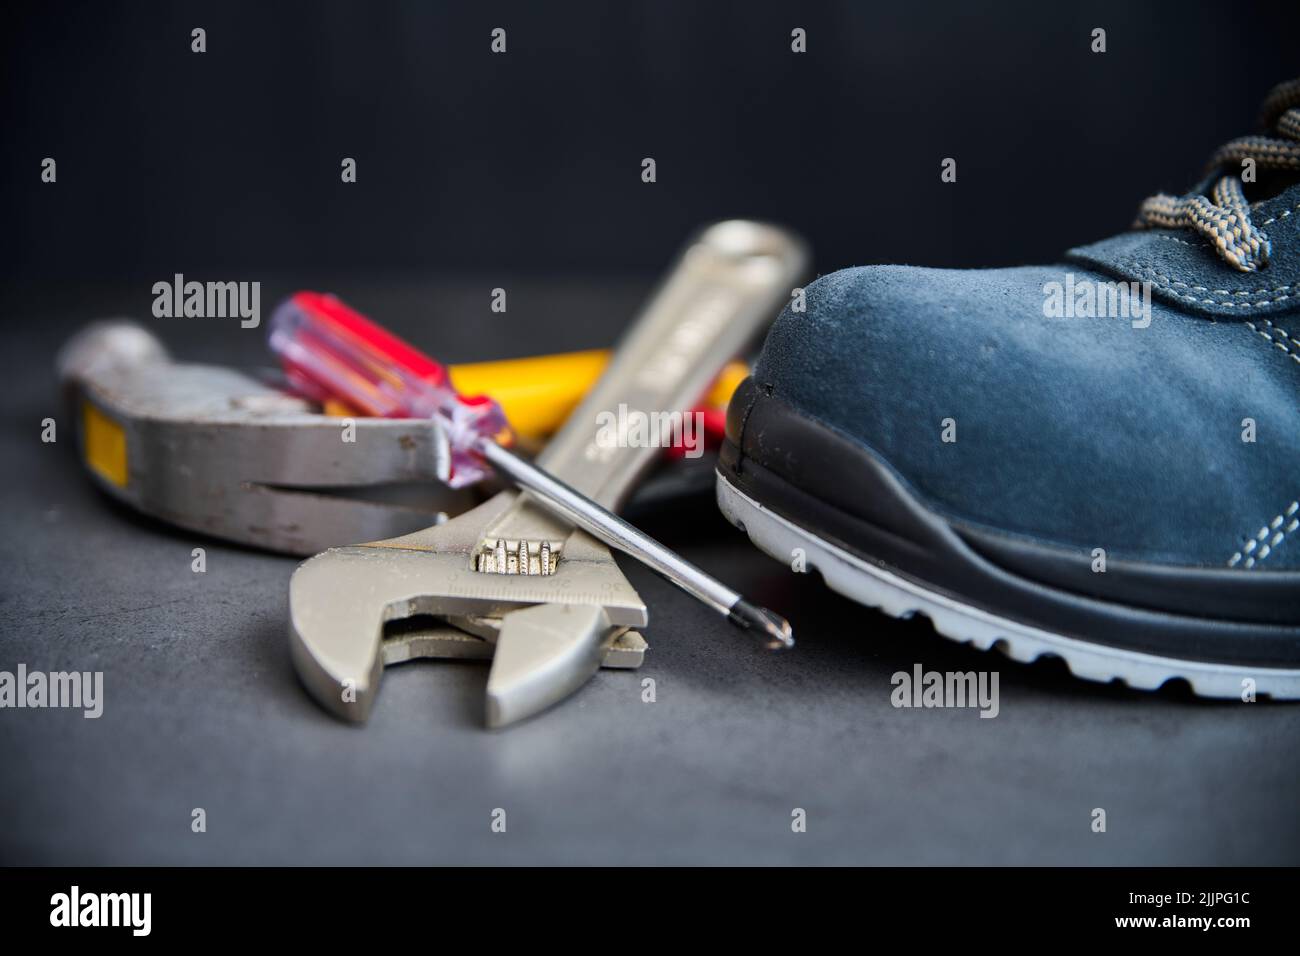 A closeup of metal tools placed next to a blue suede boot on a blurry background Stock Photo